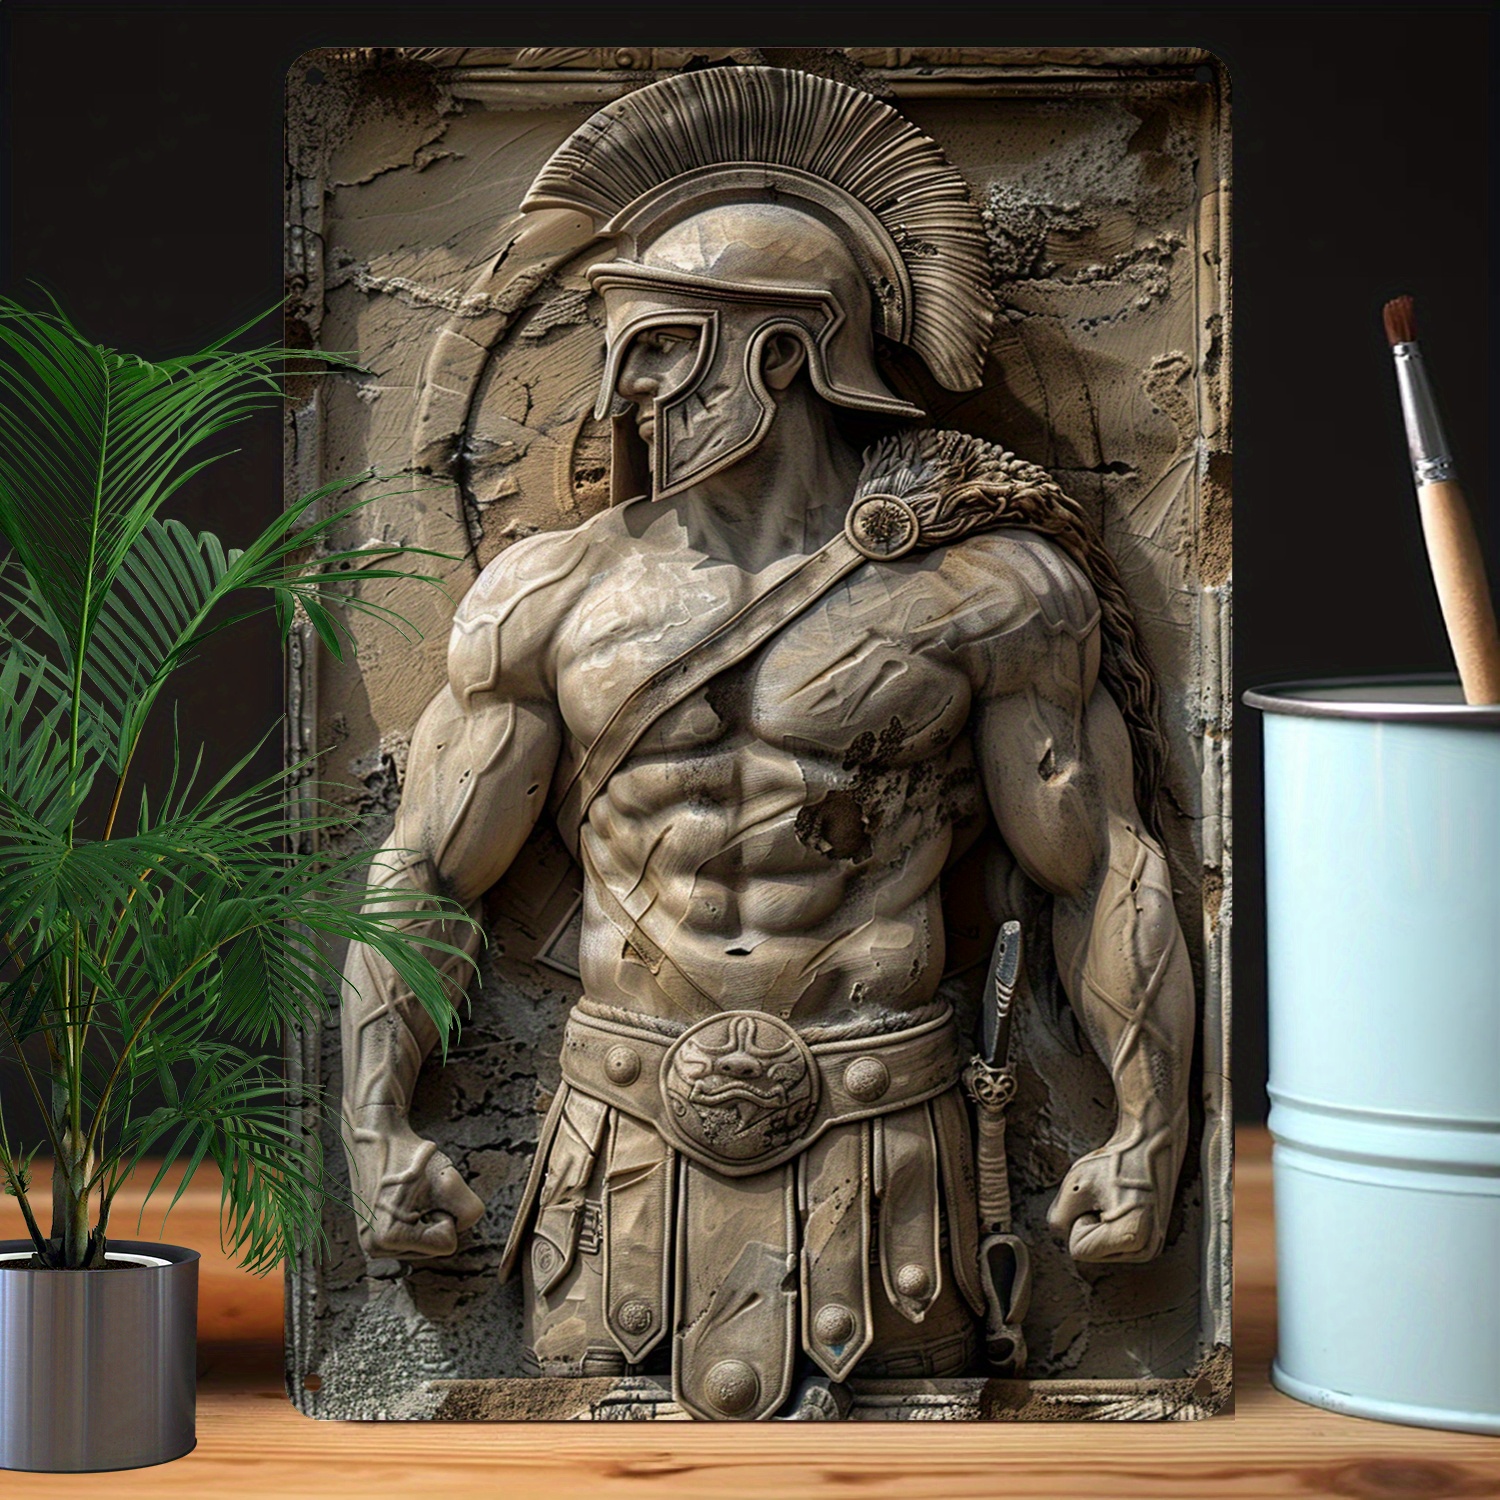 

1pc Aluminum Metal Wall Art, 8x12 Inch Gladiator Theme 3d Relief Sculpture, High Durability & Moisture Resistant Decor For Home Gym, Garden, Bathroom, Funny Vintage Wall Decorations, Unique Gift A3238